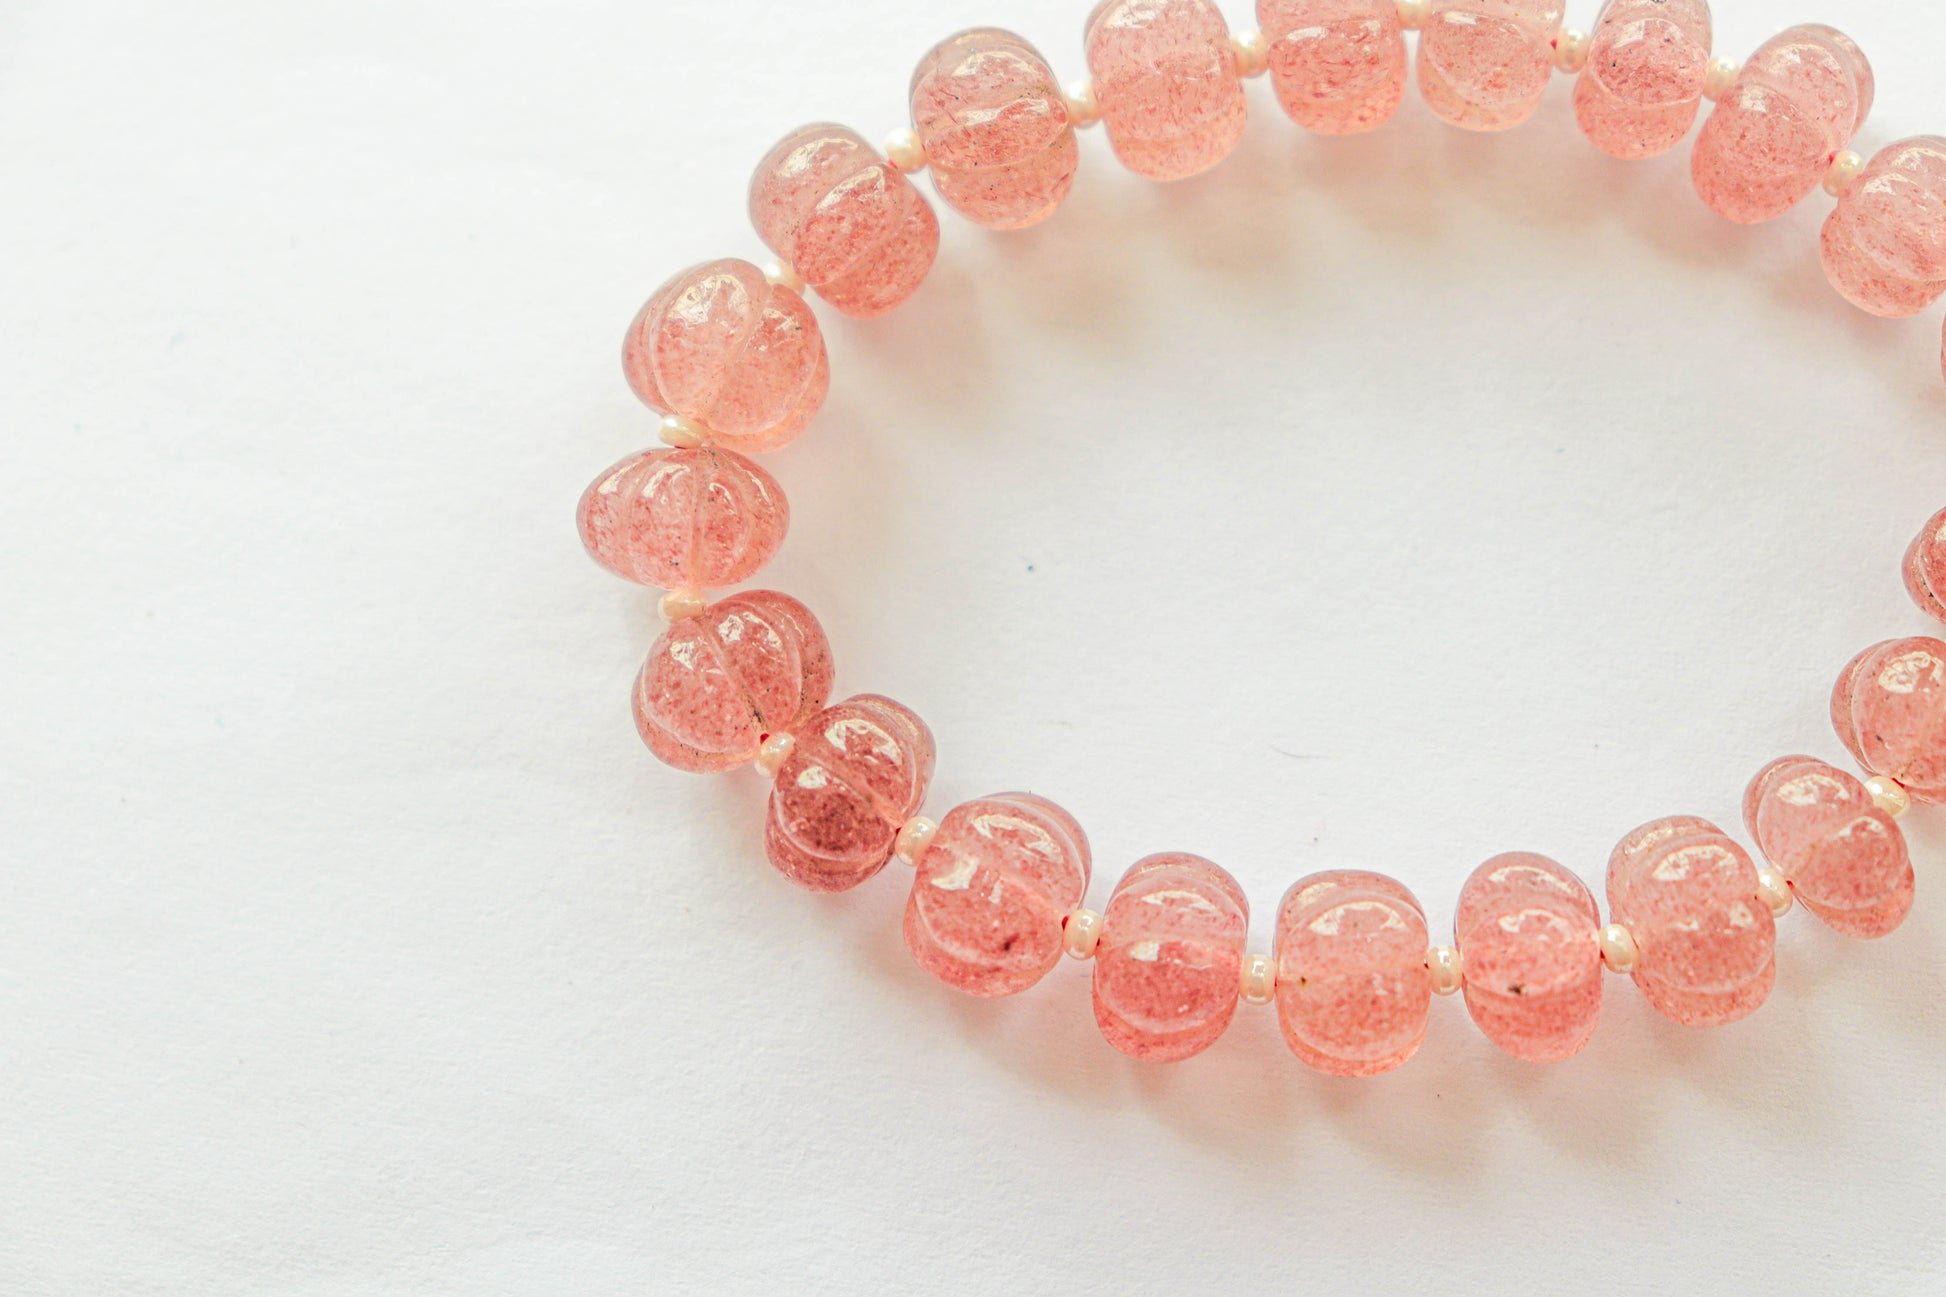 Pink Strawberry Quartz Carved Melons | 8-11mm | 19 Pieces in a String | Natural Gemstone Beads for Jewelry Making | Beadsforyourjewellery Beadsforyourjewelry